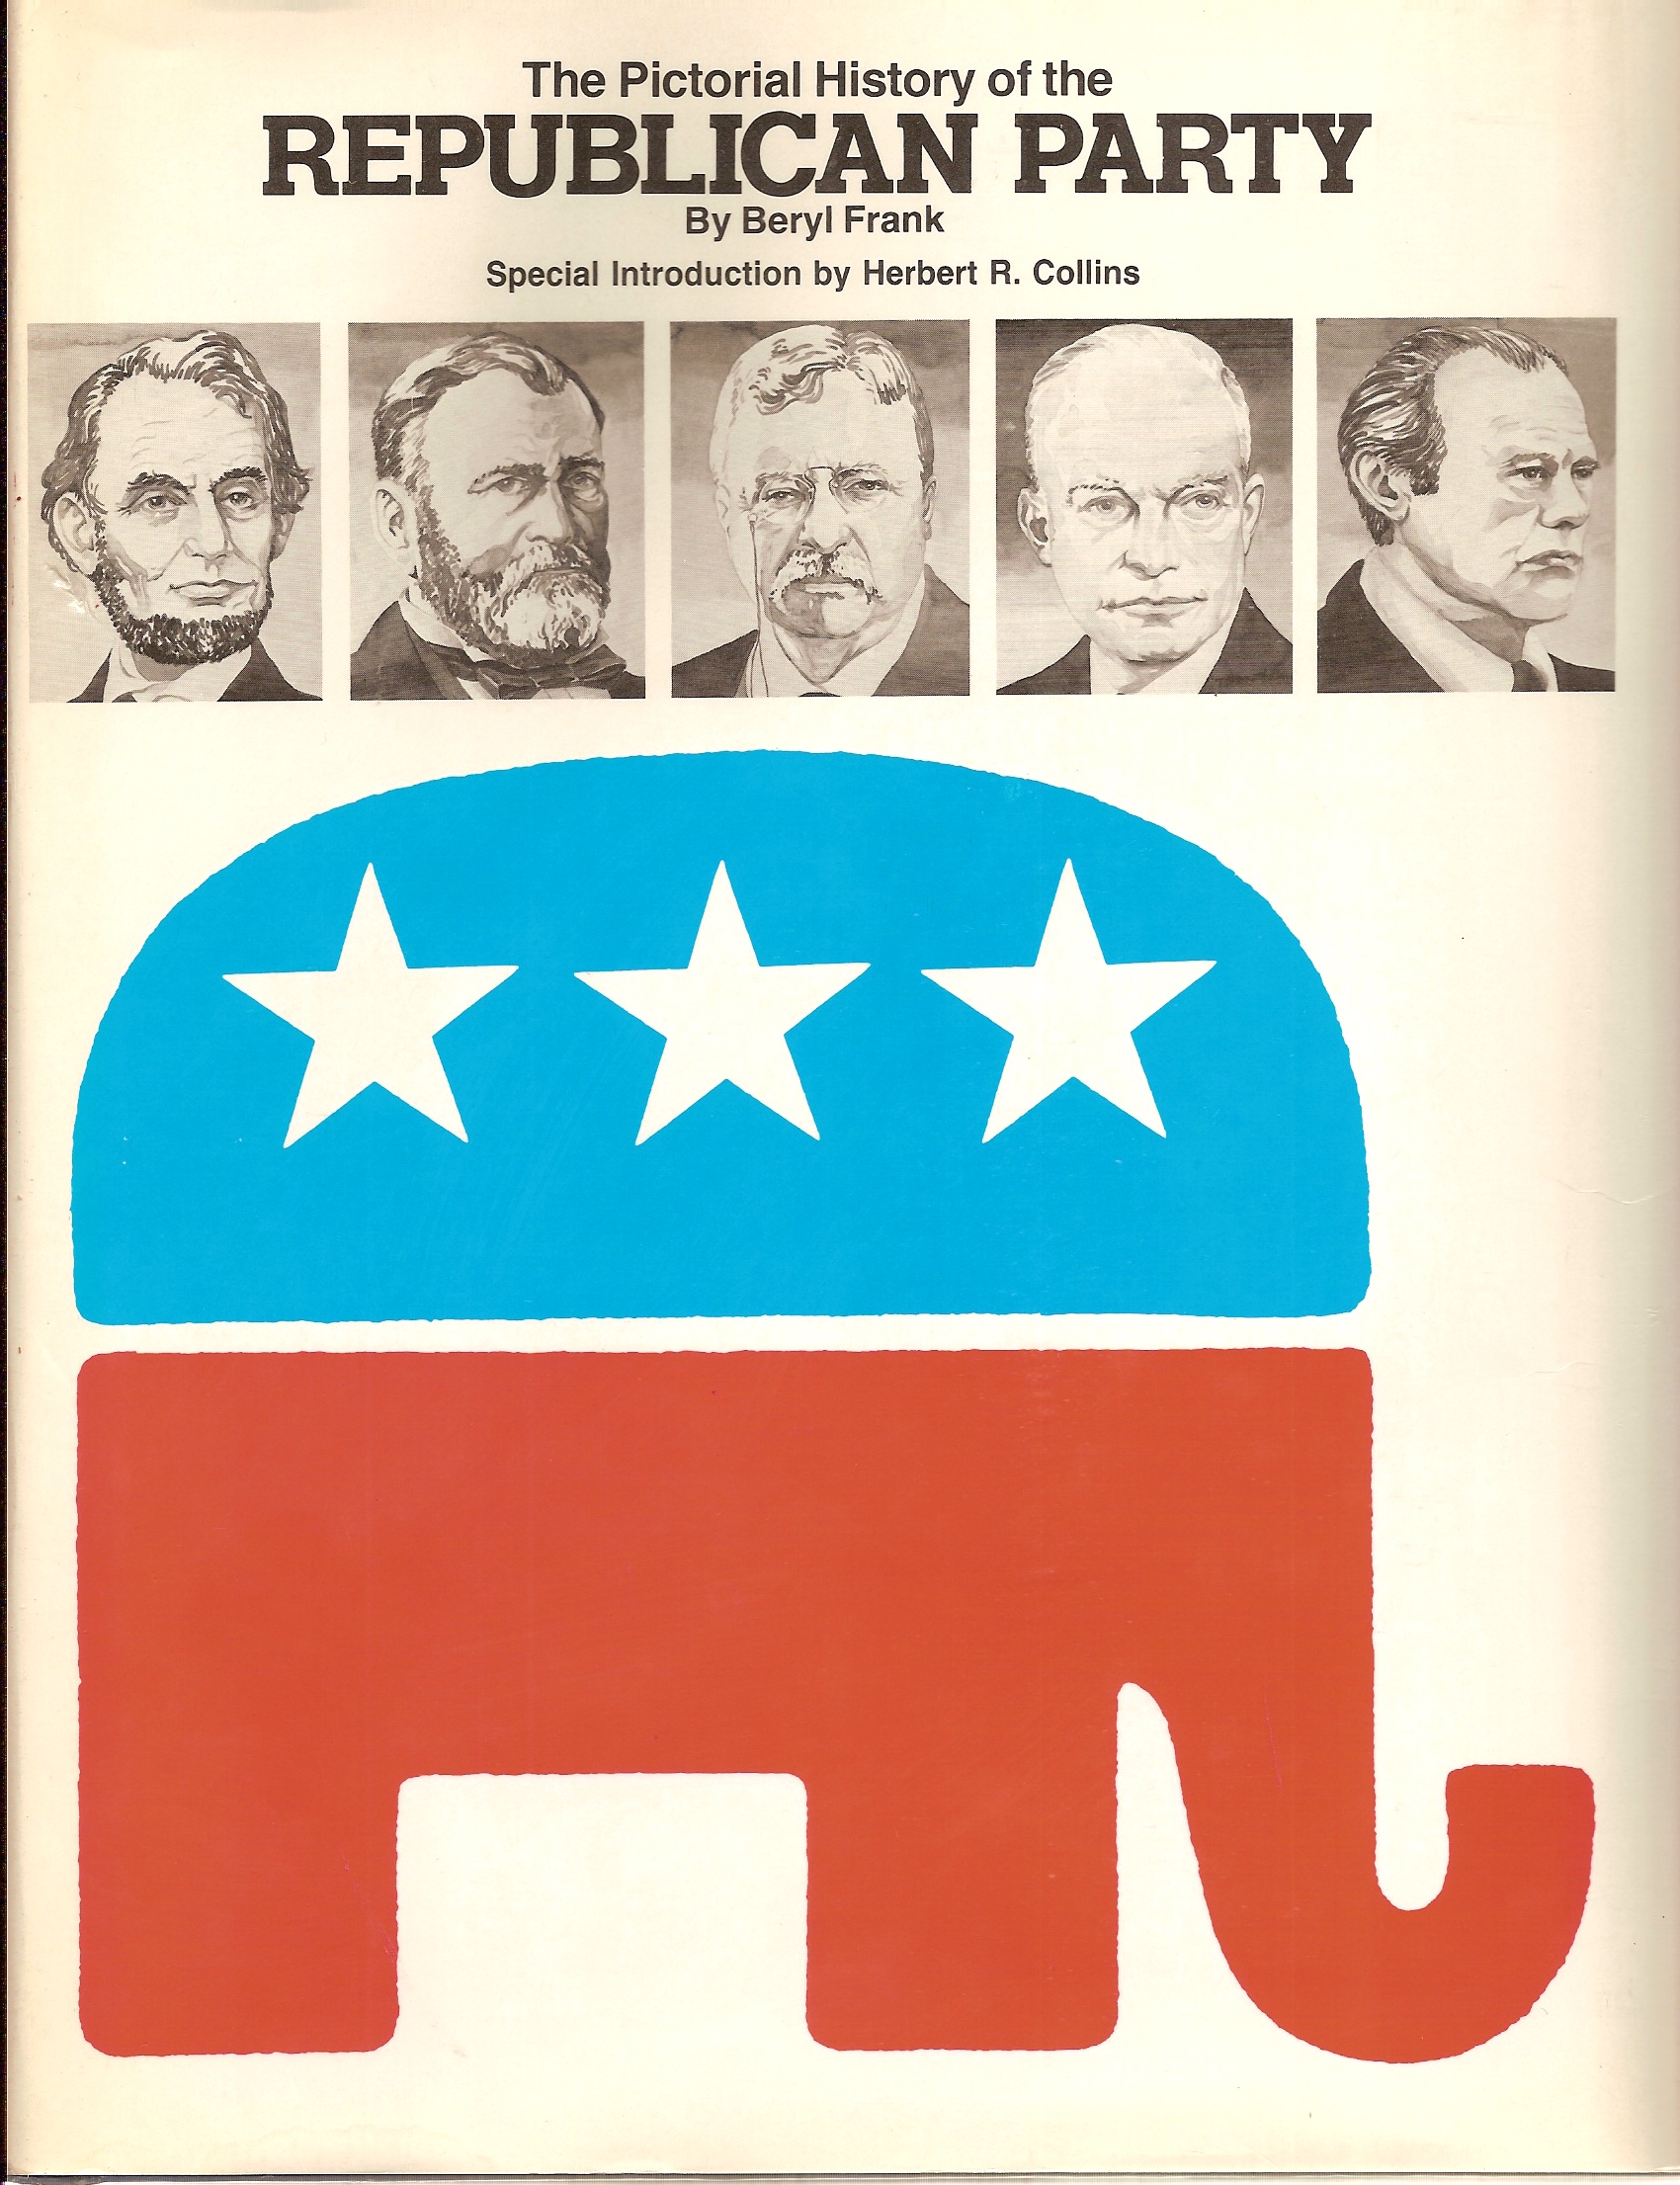 FRANK, BERYL - Pictorial History of the Republican Party, the